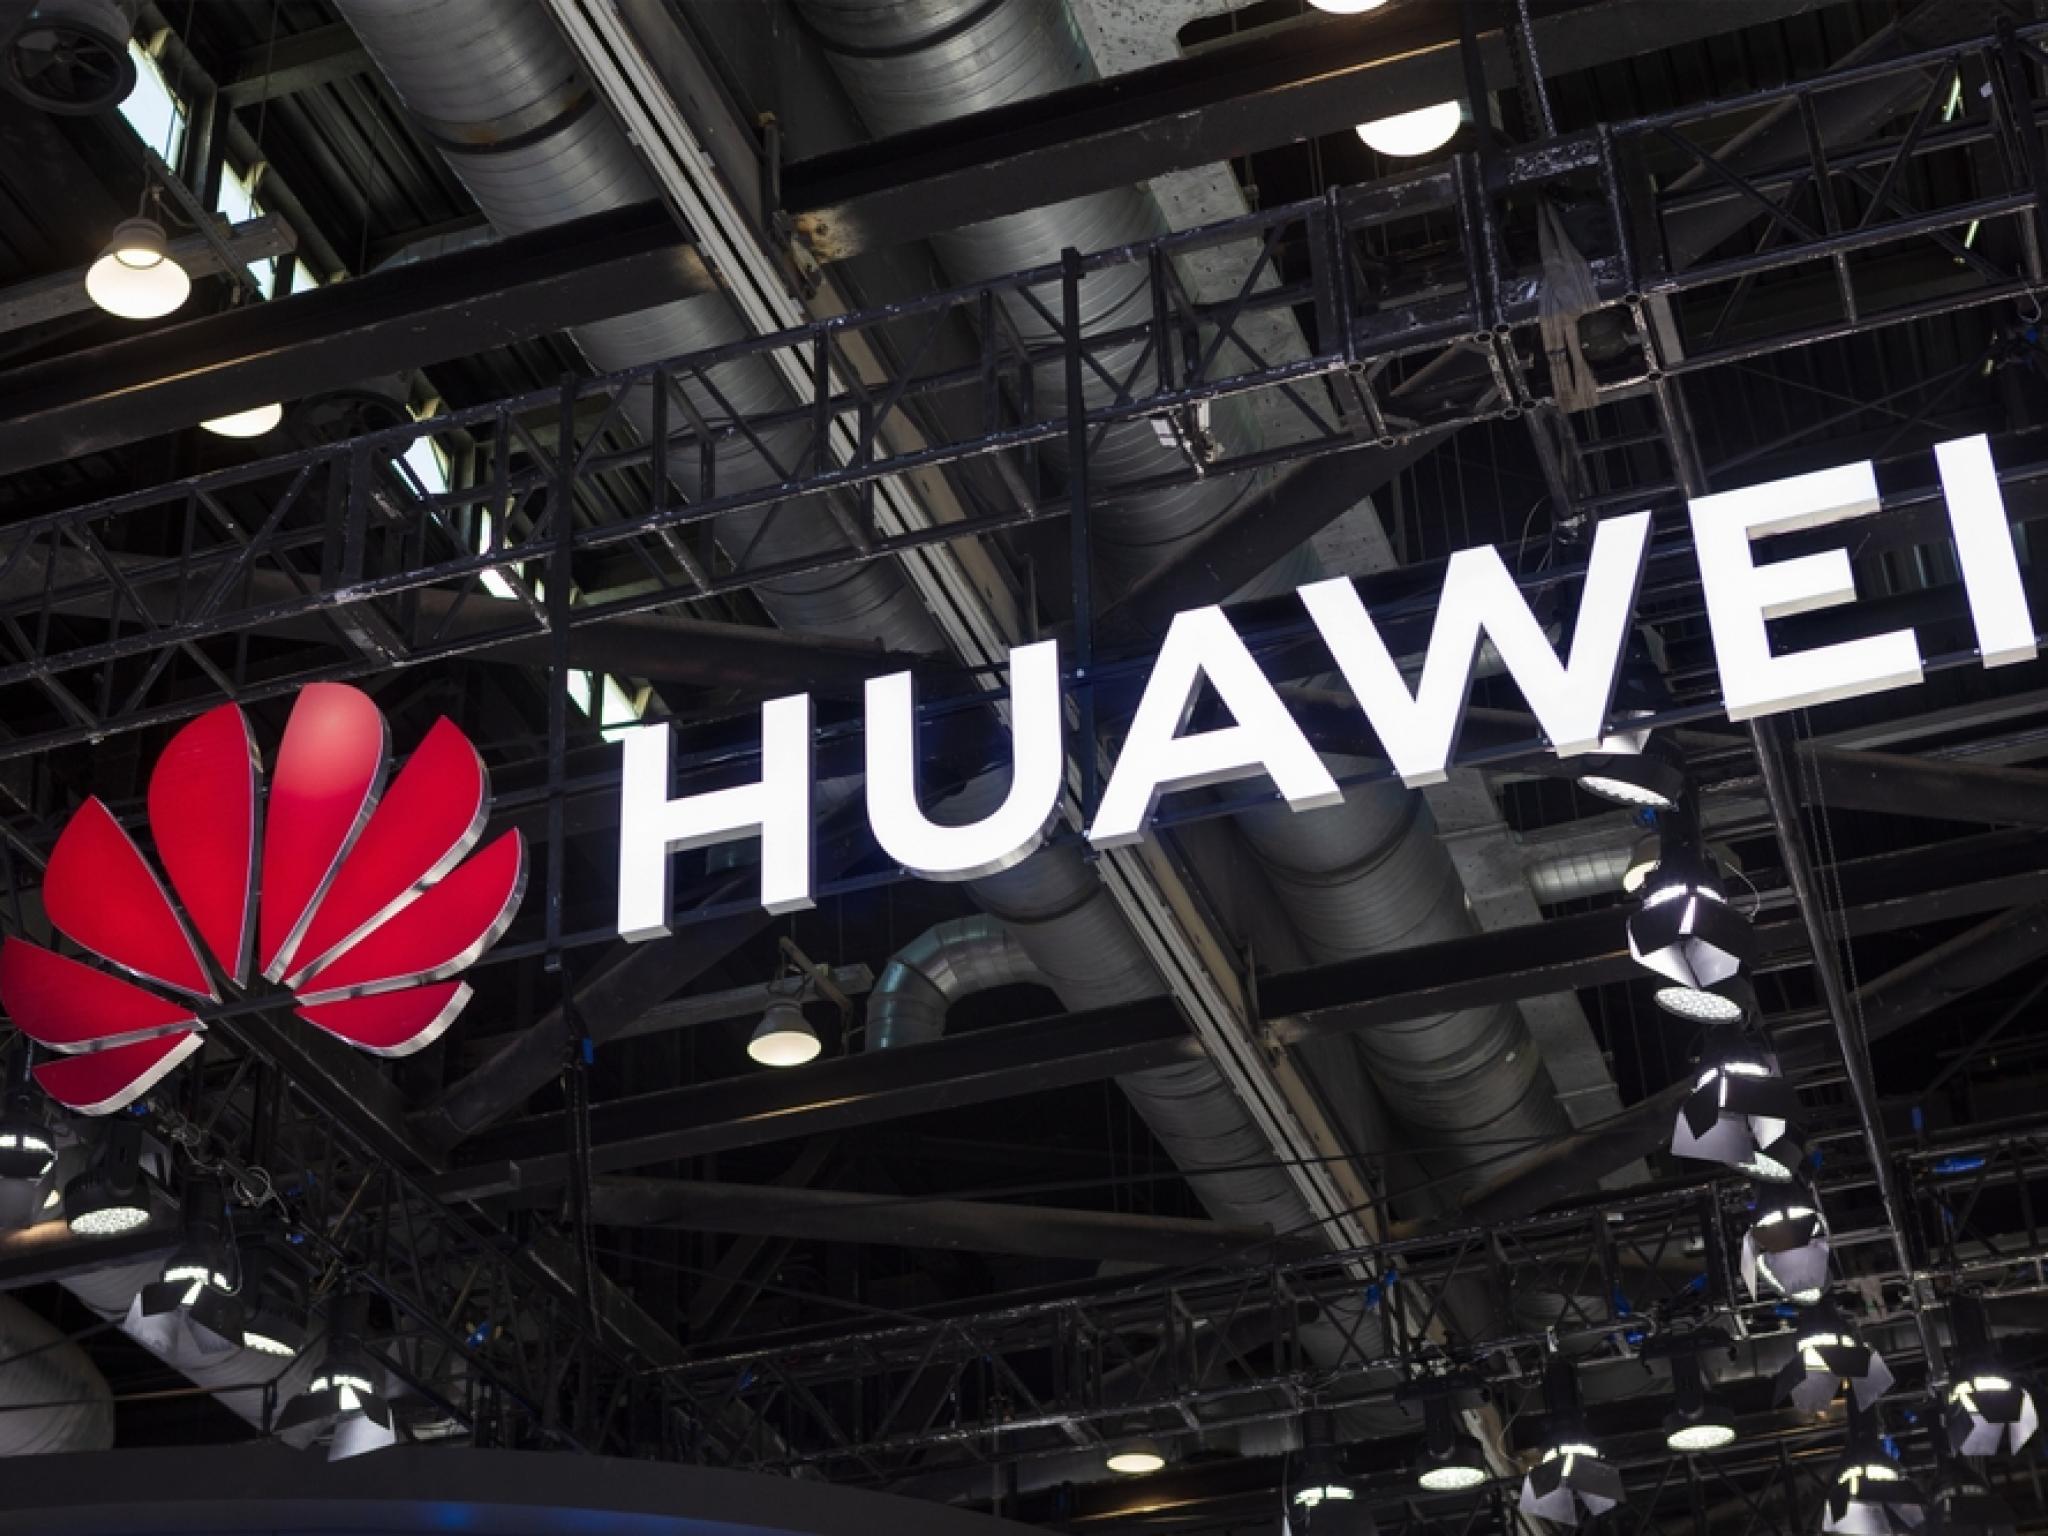  threat-for-nvidia-amd-huawei-ramps-up-semiconductor-rd-in-shanghai-to-counter-us-restrictions 